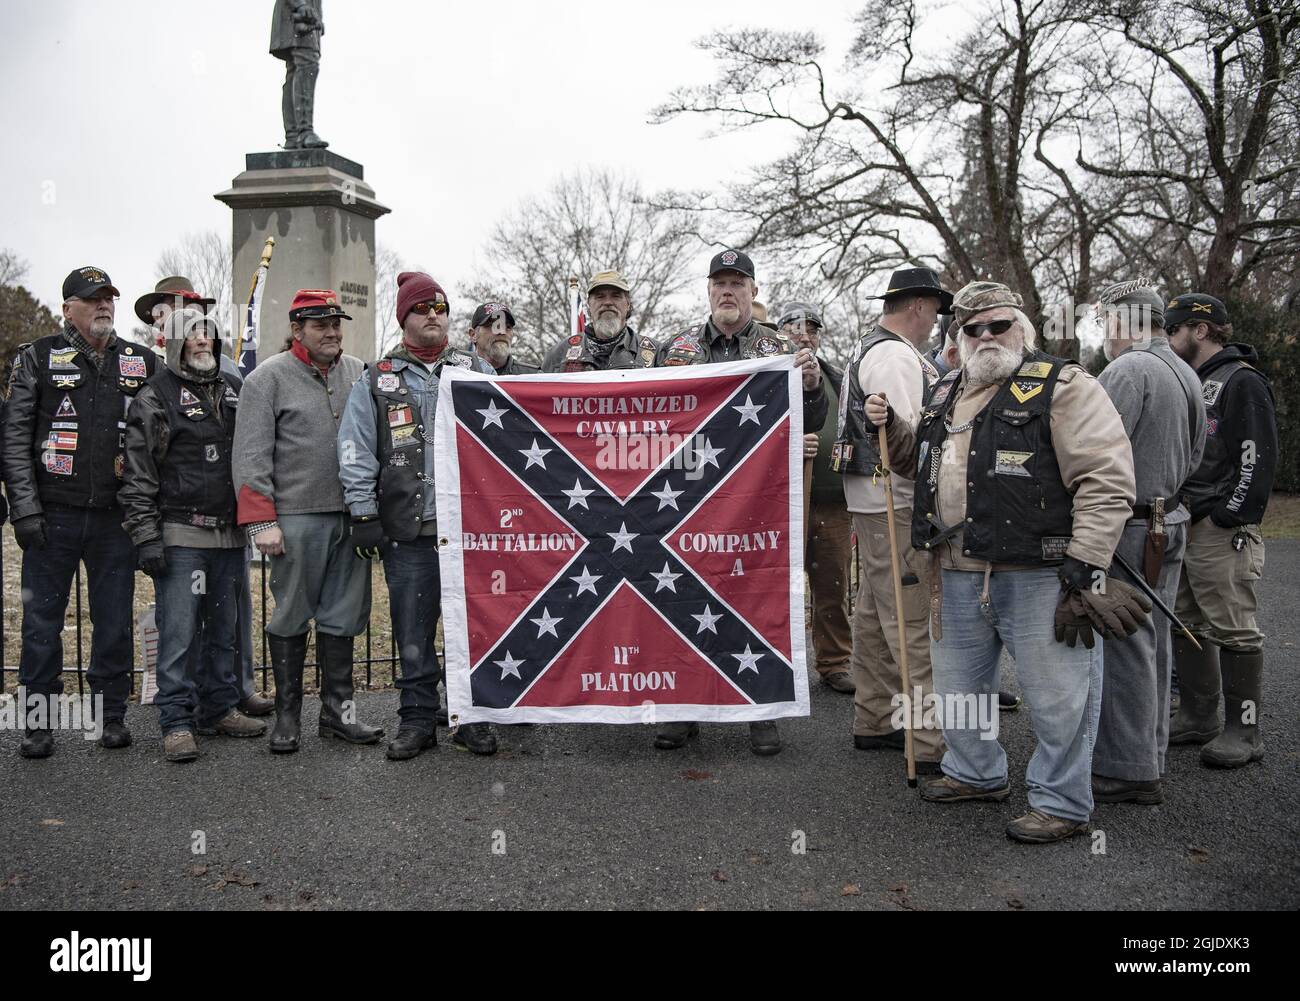 Lee-Jackson Day Parade, Lexington Virginia, USA, January 16, 2021, commemorating Confederate generals Robert E. Lee and Stonewall Jackson. People walking down Main Street and gathering at the Stonewall Jackson memorial. Many participants are dressed in Confederate uniforms from the civil war. Photo: Peter Wixtrom / Aftonbladet / TT code 2512 Stock Photo